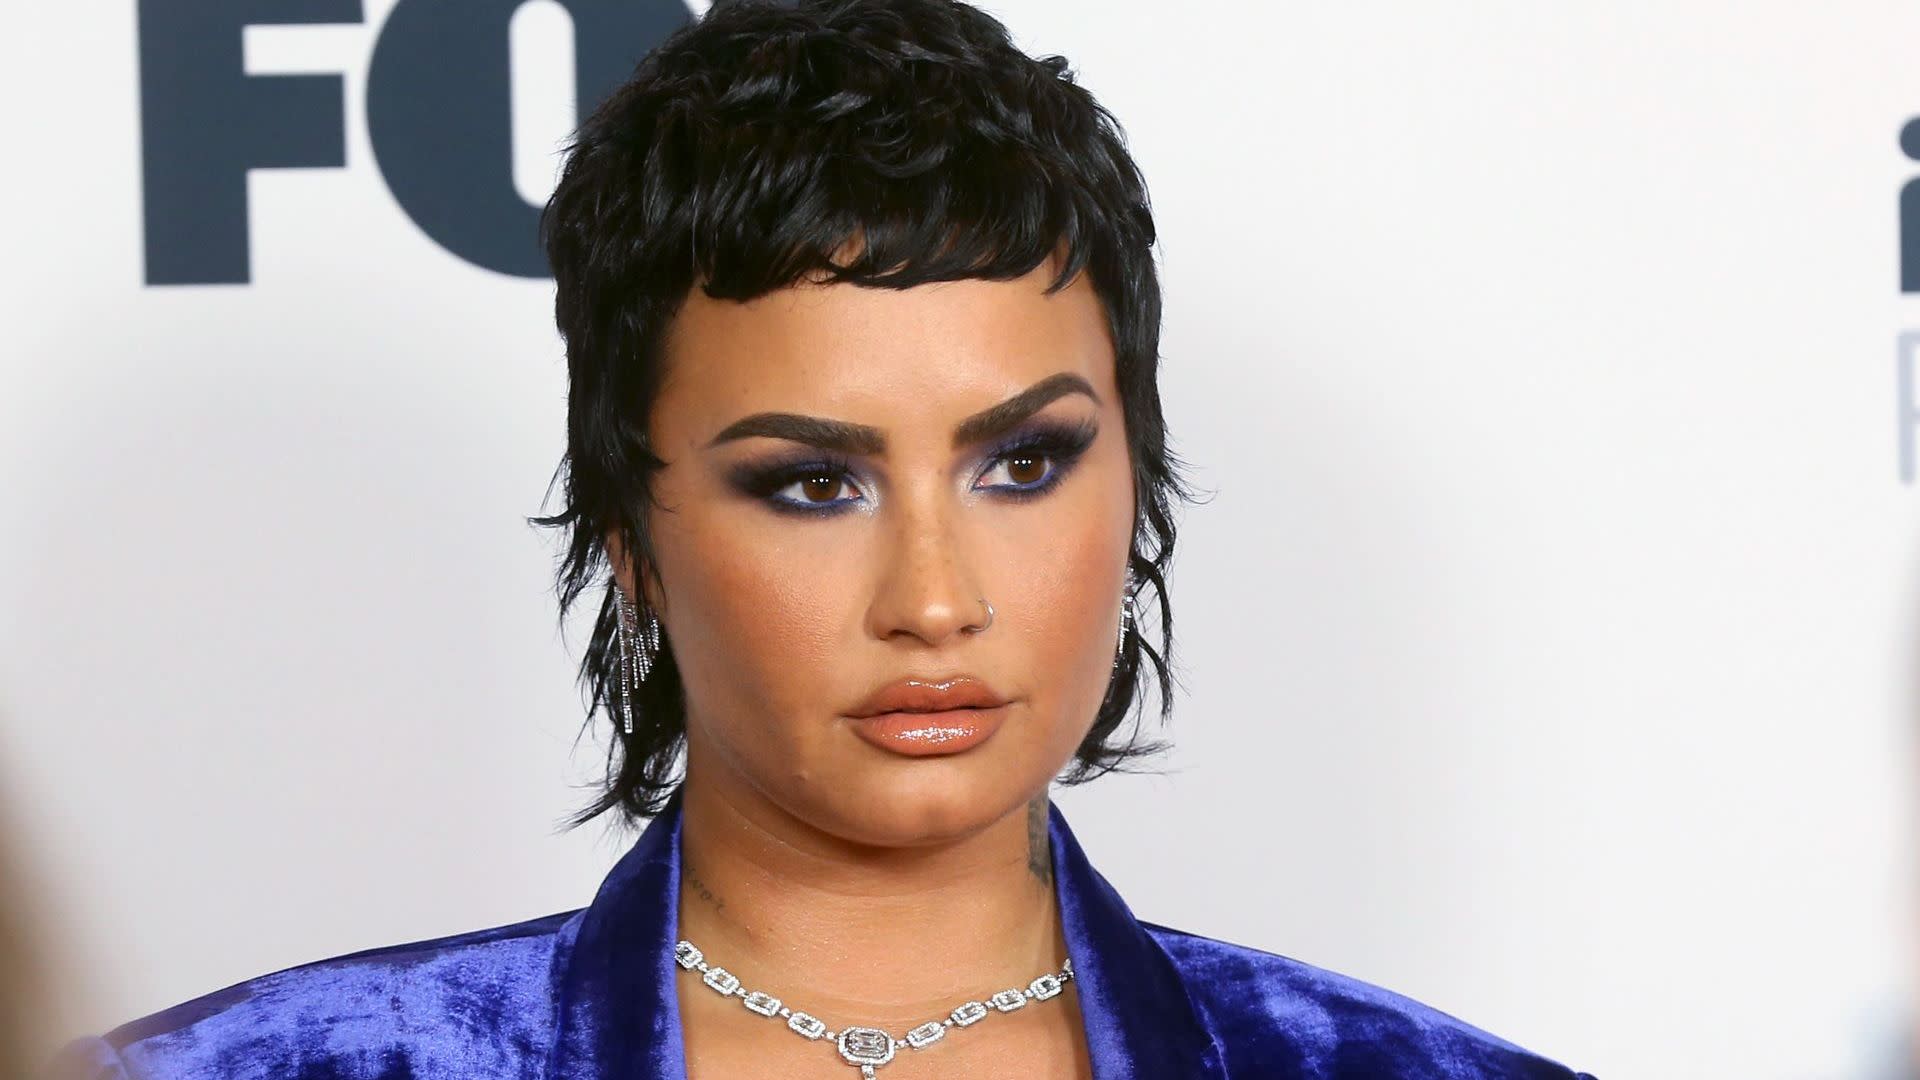 Demi Lovato Wants People to Stop Using Offensive Term ‘Aliens’ for Extraterrestrial Beings